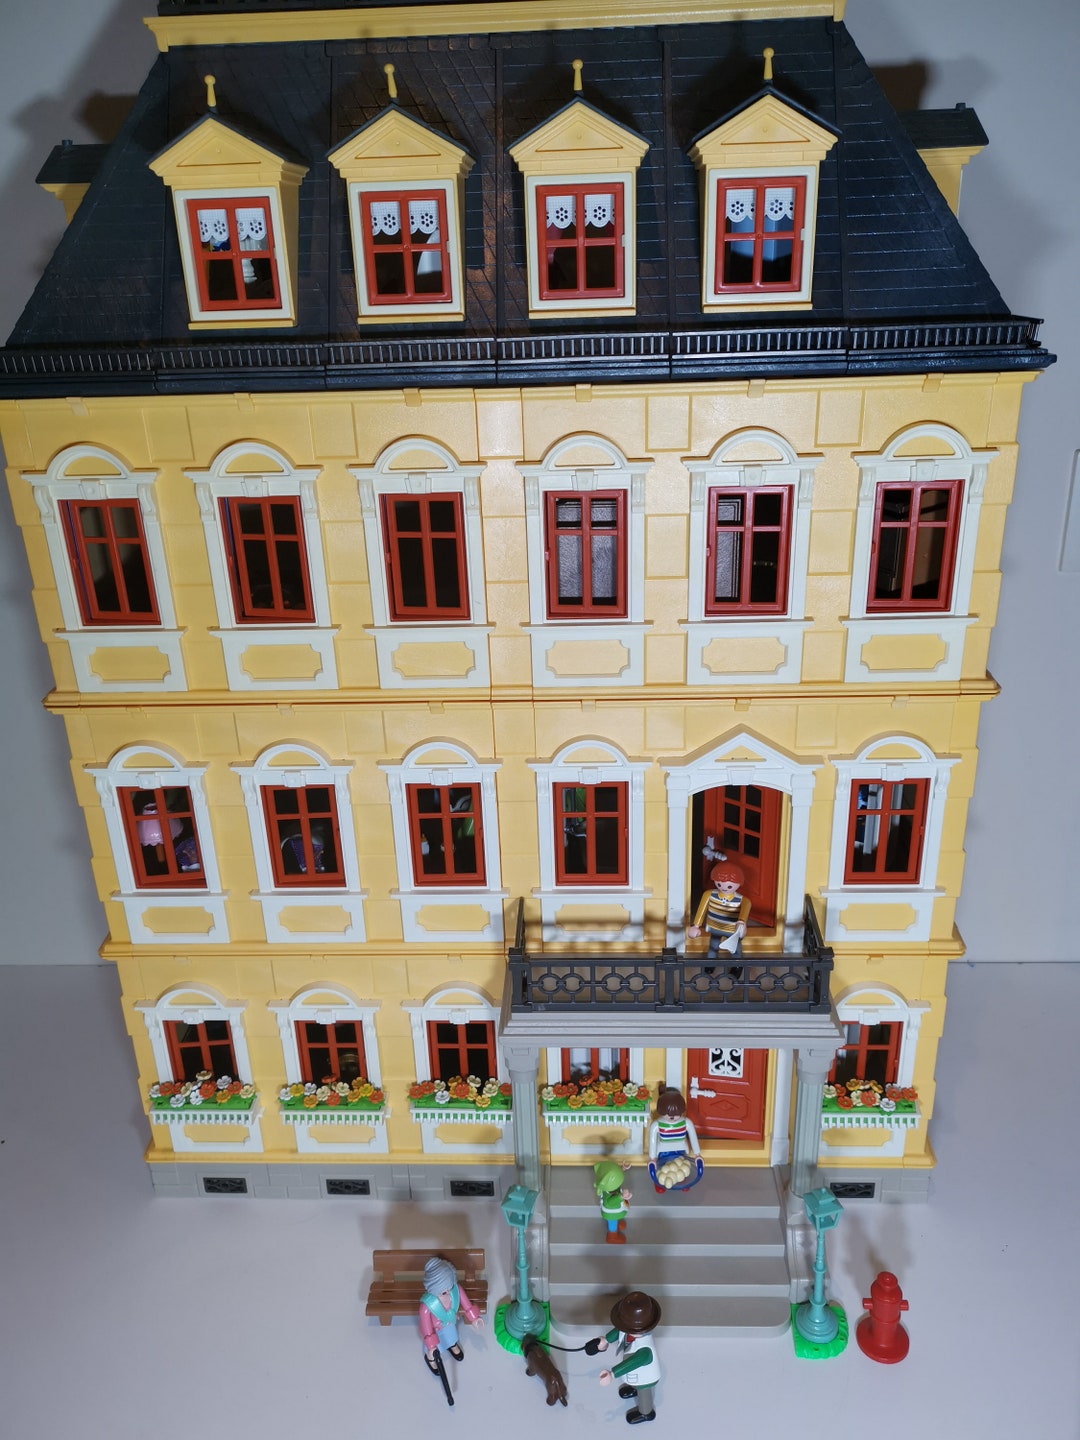 The best prices today for Playmobil® City Life Extension for the